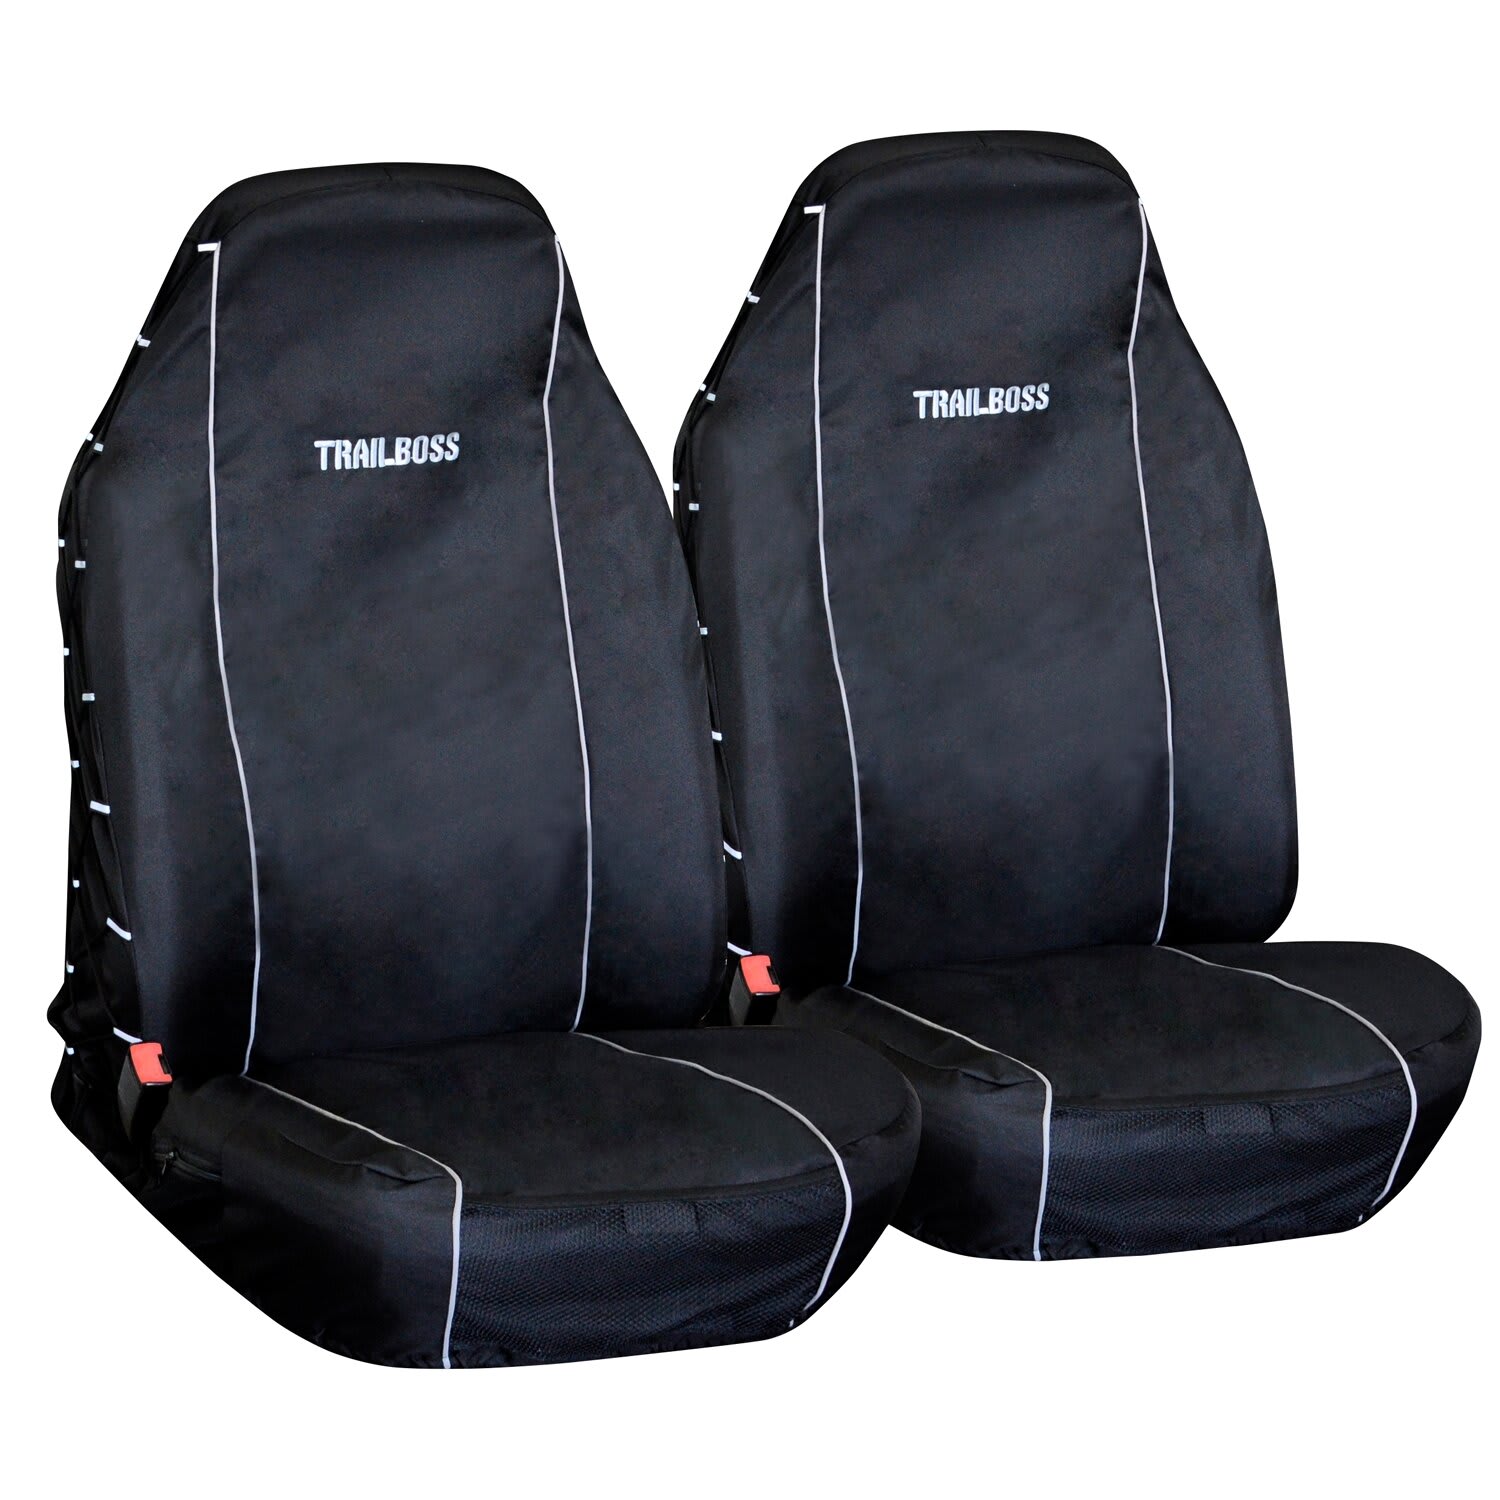 TrailBoss Front Seat Cover 2 piece 1012737 Outdoor Warehouse